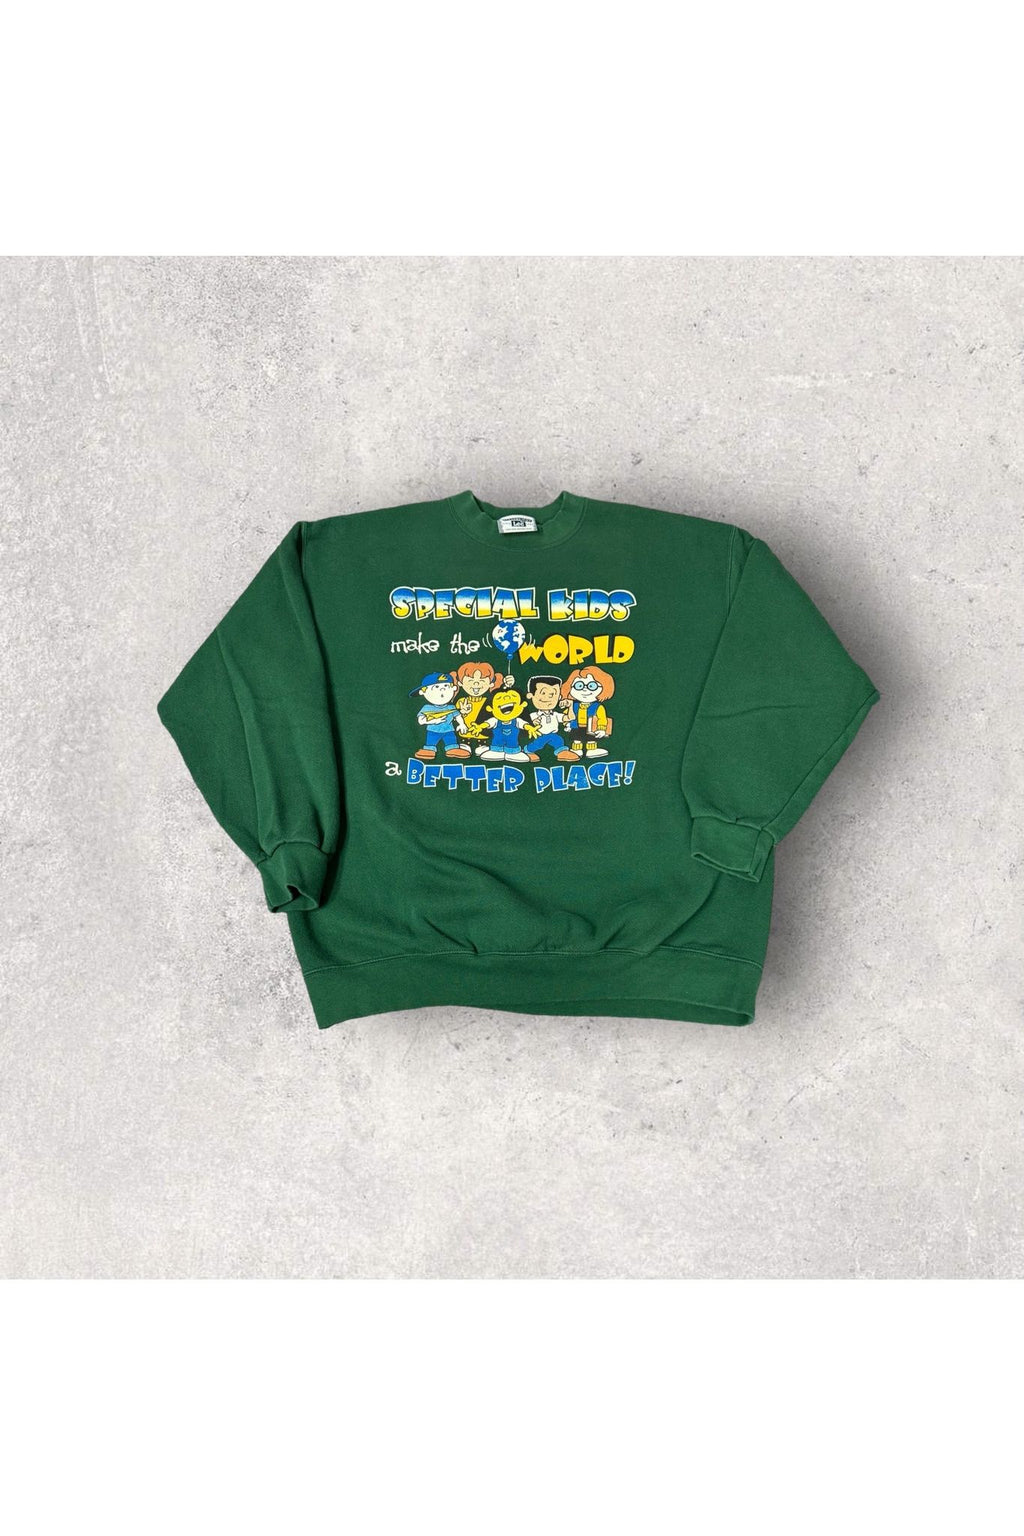 Vintage Lee Heavyweight Special Kids Made The World A Better Place Crewneck- L